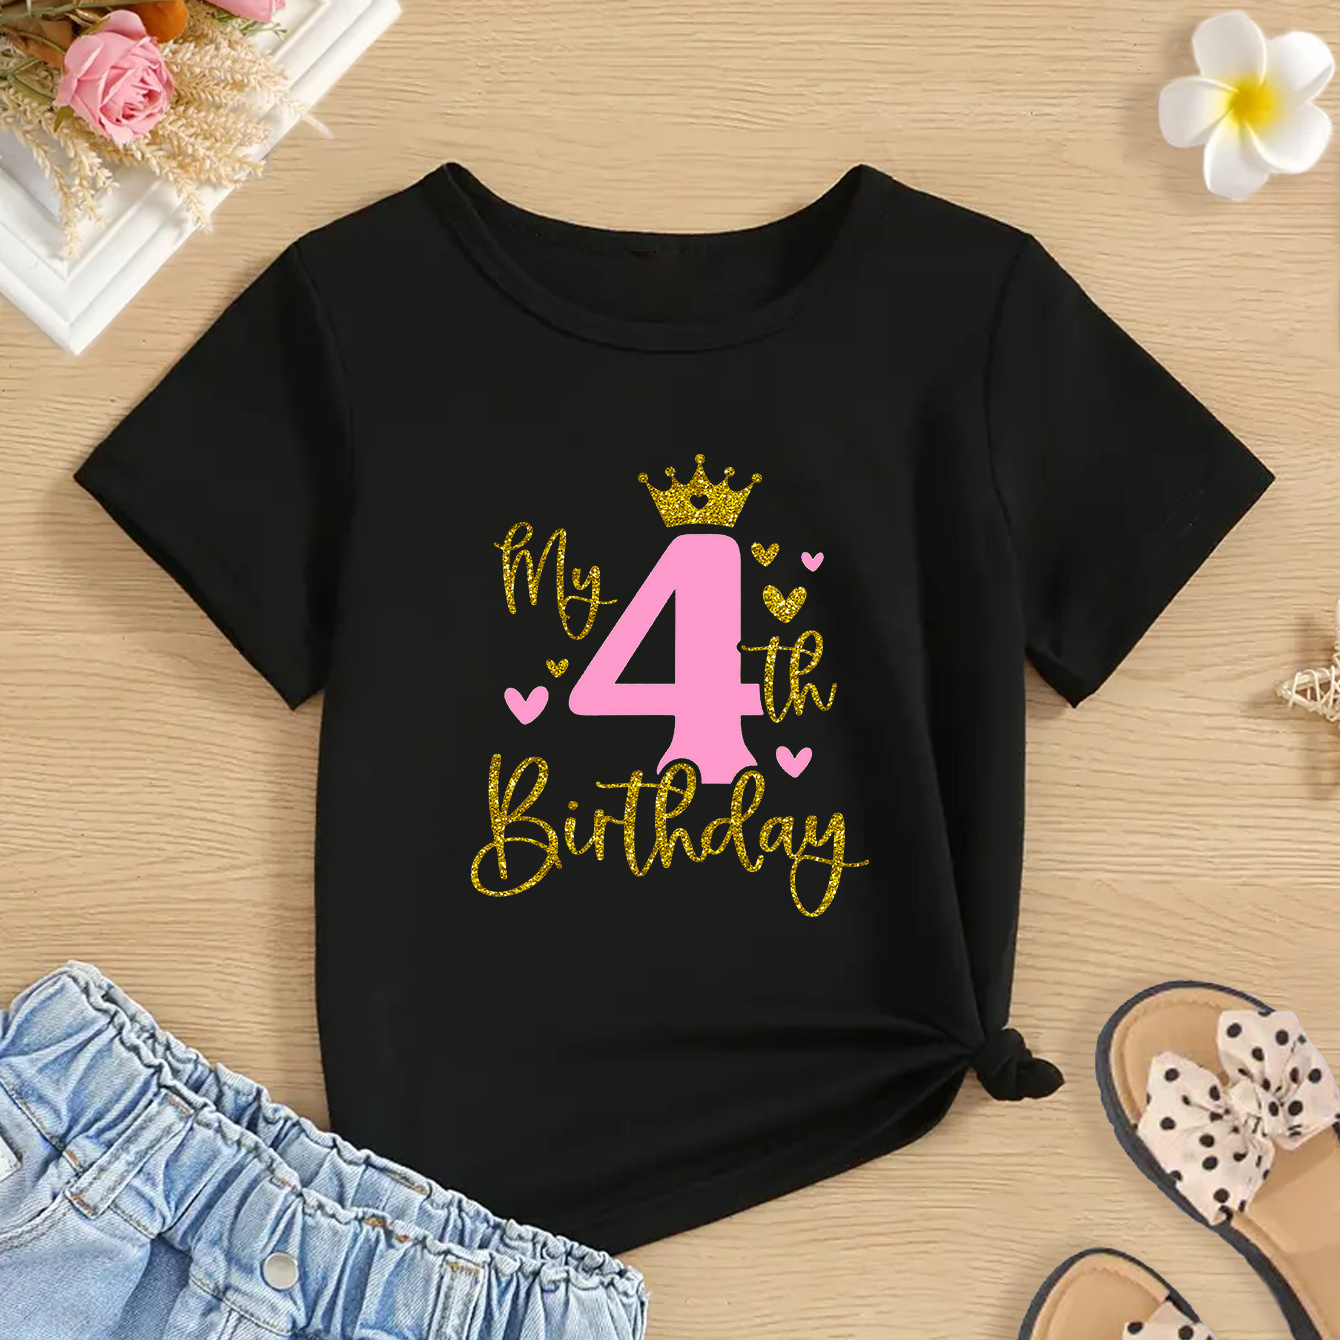 

My 4th Birthday Fashion Creative Letter Print Girls Casual Comfortable Breathable Crew Neck Short-sleeved T-shirt For Summer, Suitable For Outdoor Activities